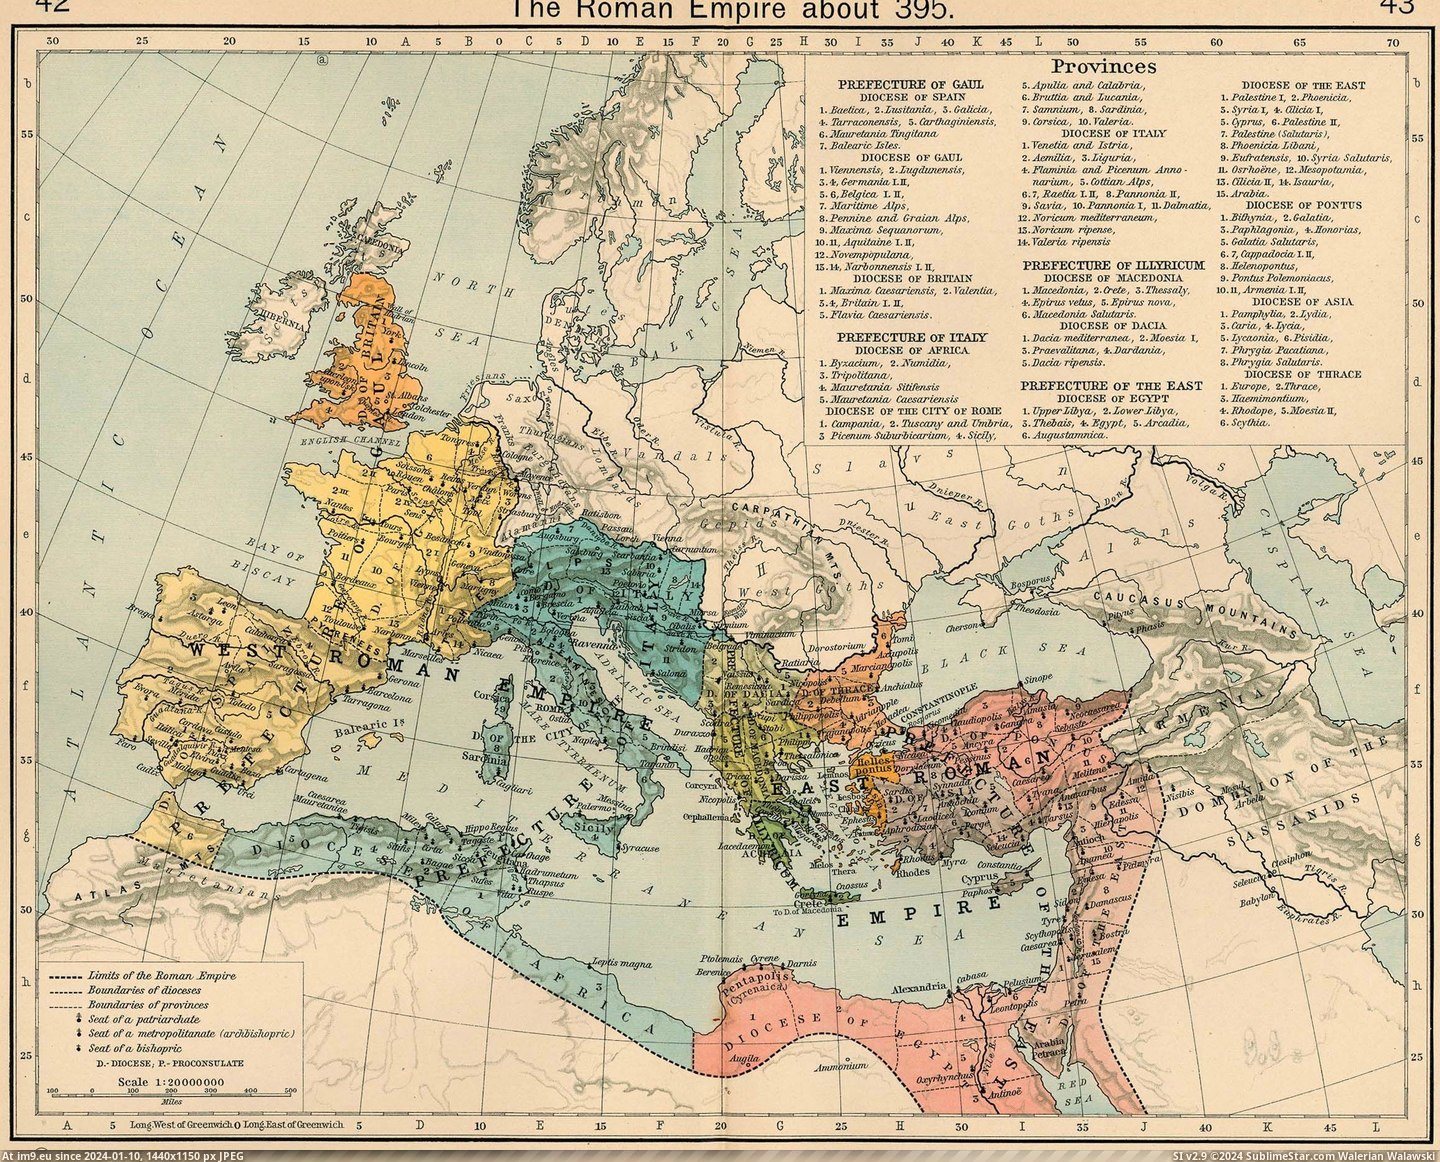 #Historical #Roman #Atlas #Empire [Mapporn] Roman Empire at 395 CE, from 'The Historical Atlas', 1911 - [2316x1861] Pic. (Image of album My r/MAPS favs))